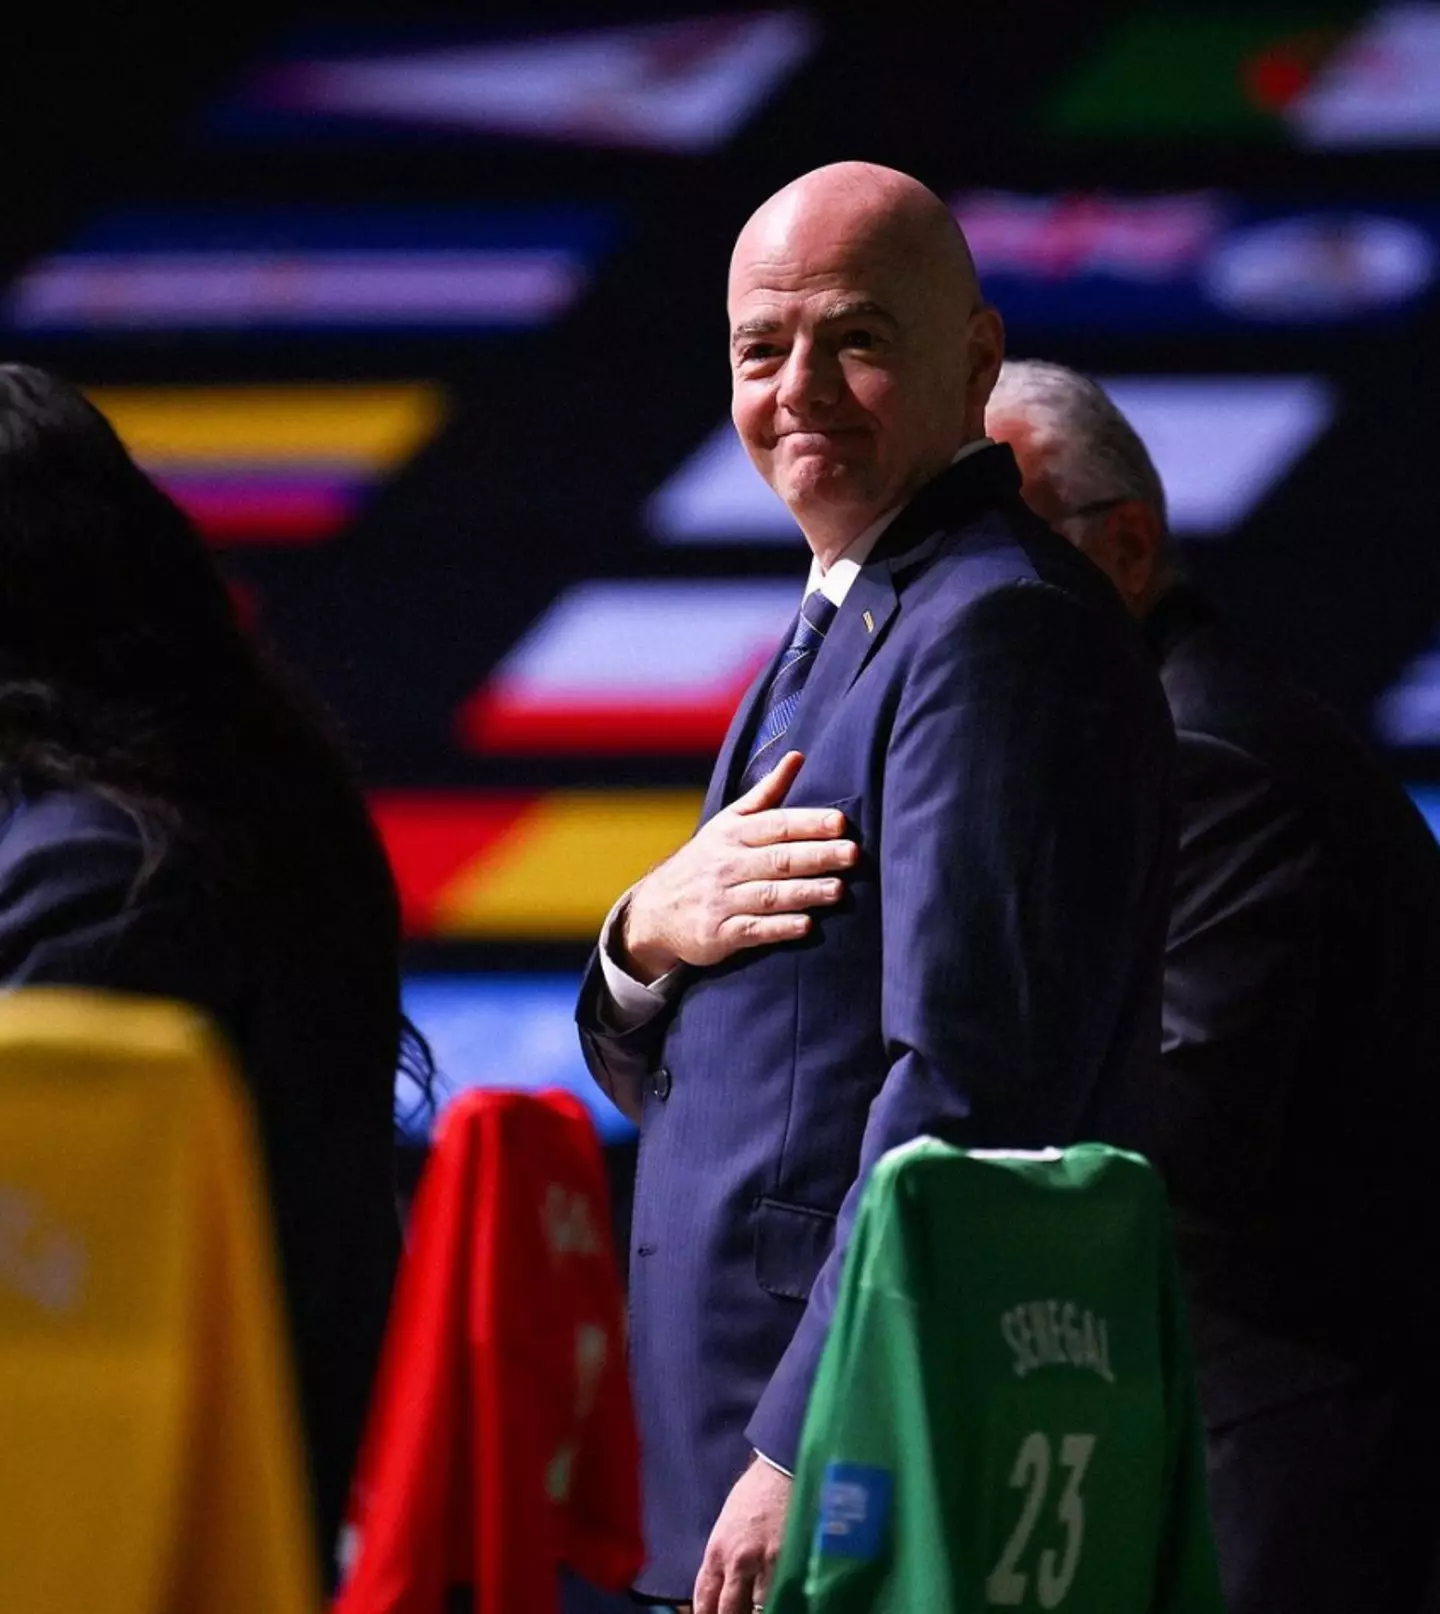 Infantino has addressed his plans to close the gender pay gap.